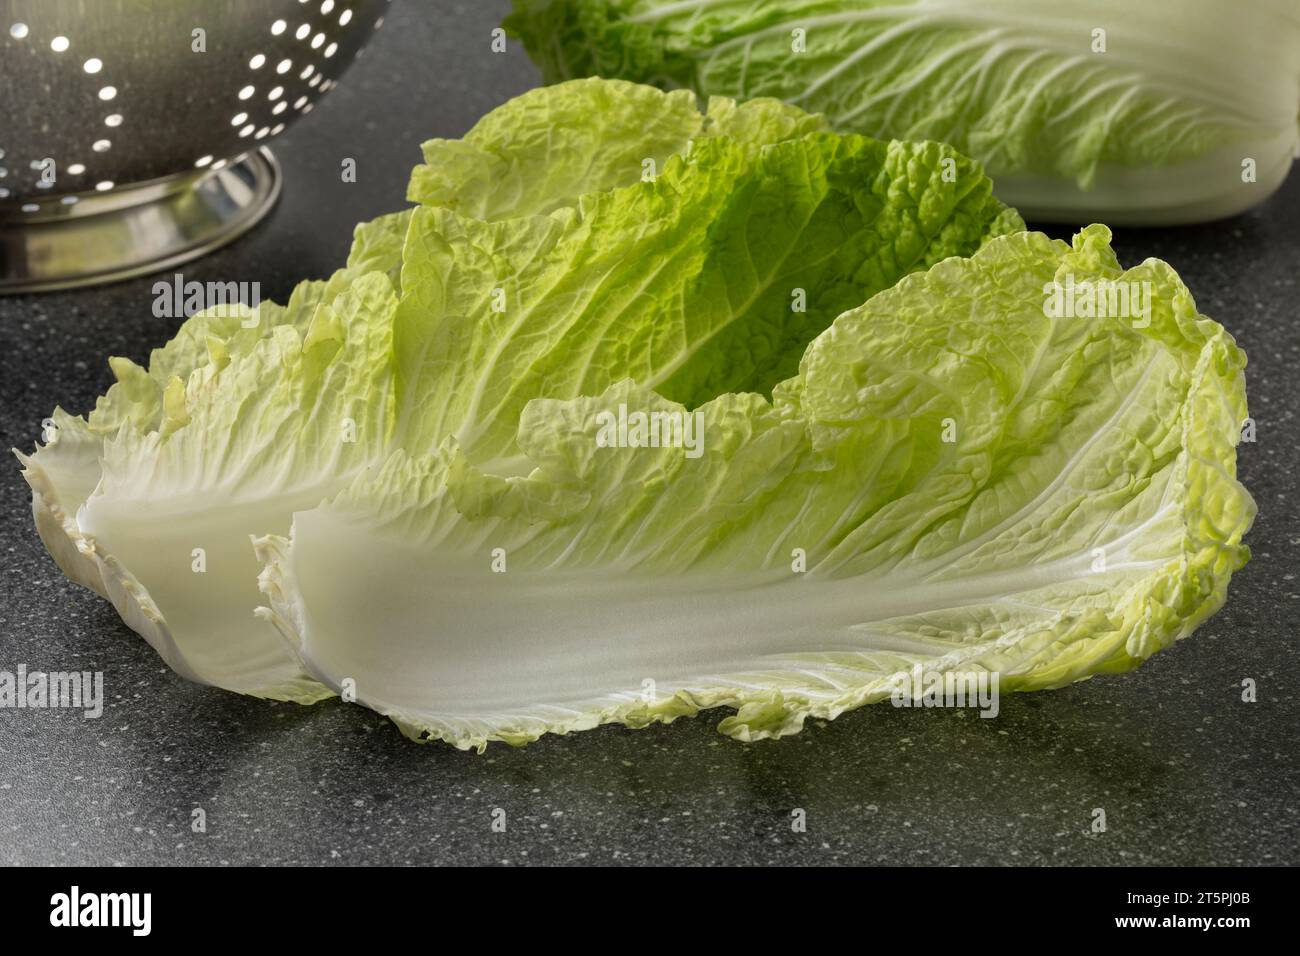 Pair of fresh raw Chinese cabbage leaves close up on a cutting board Stock Photo